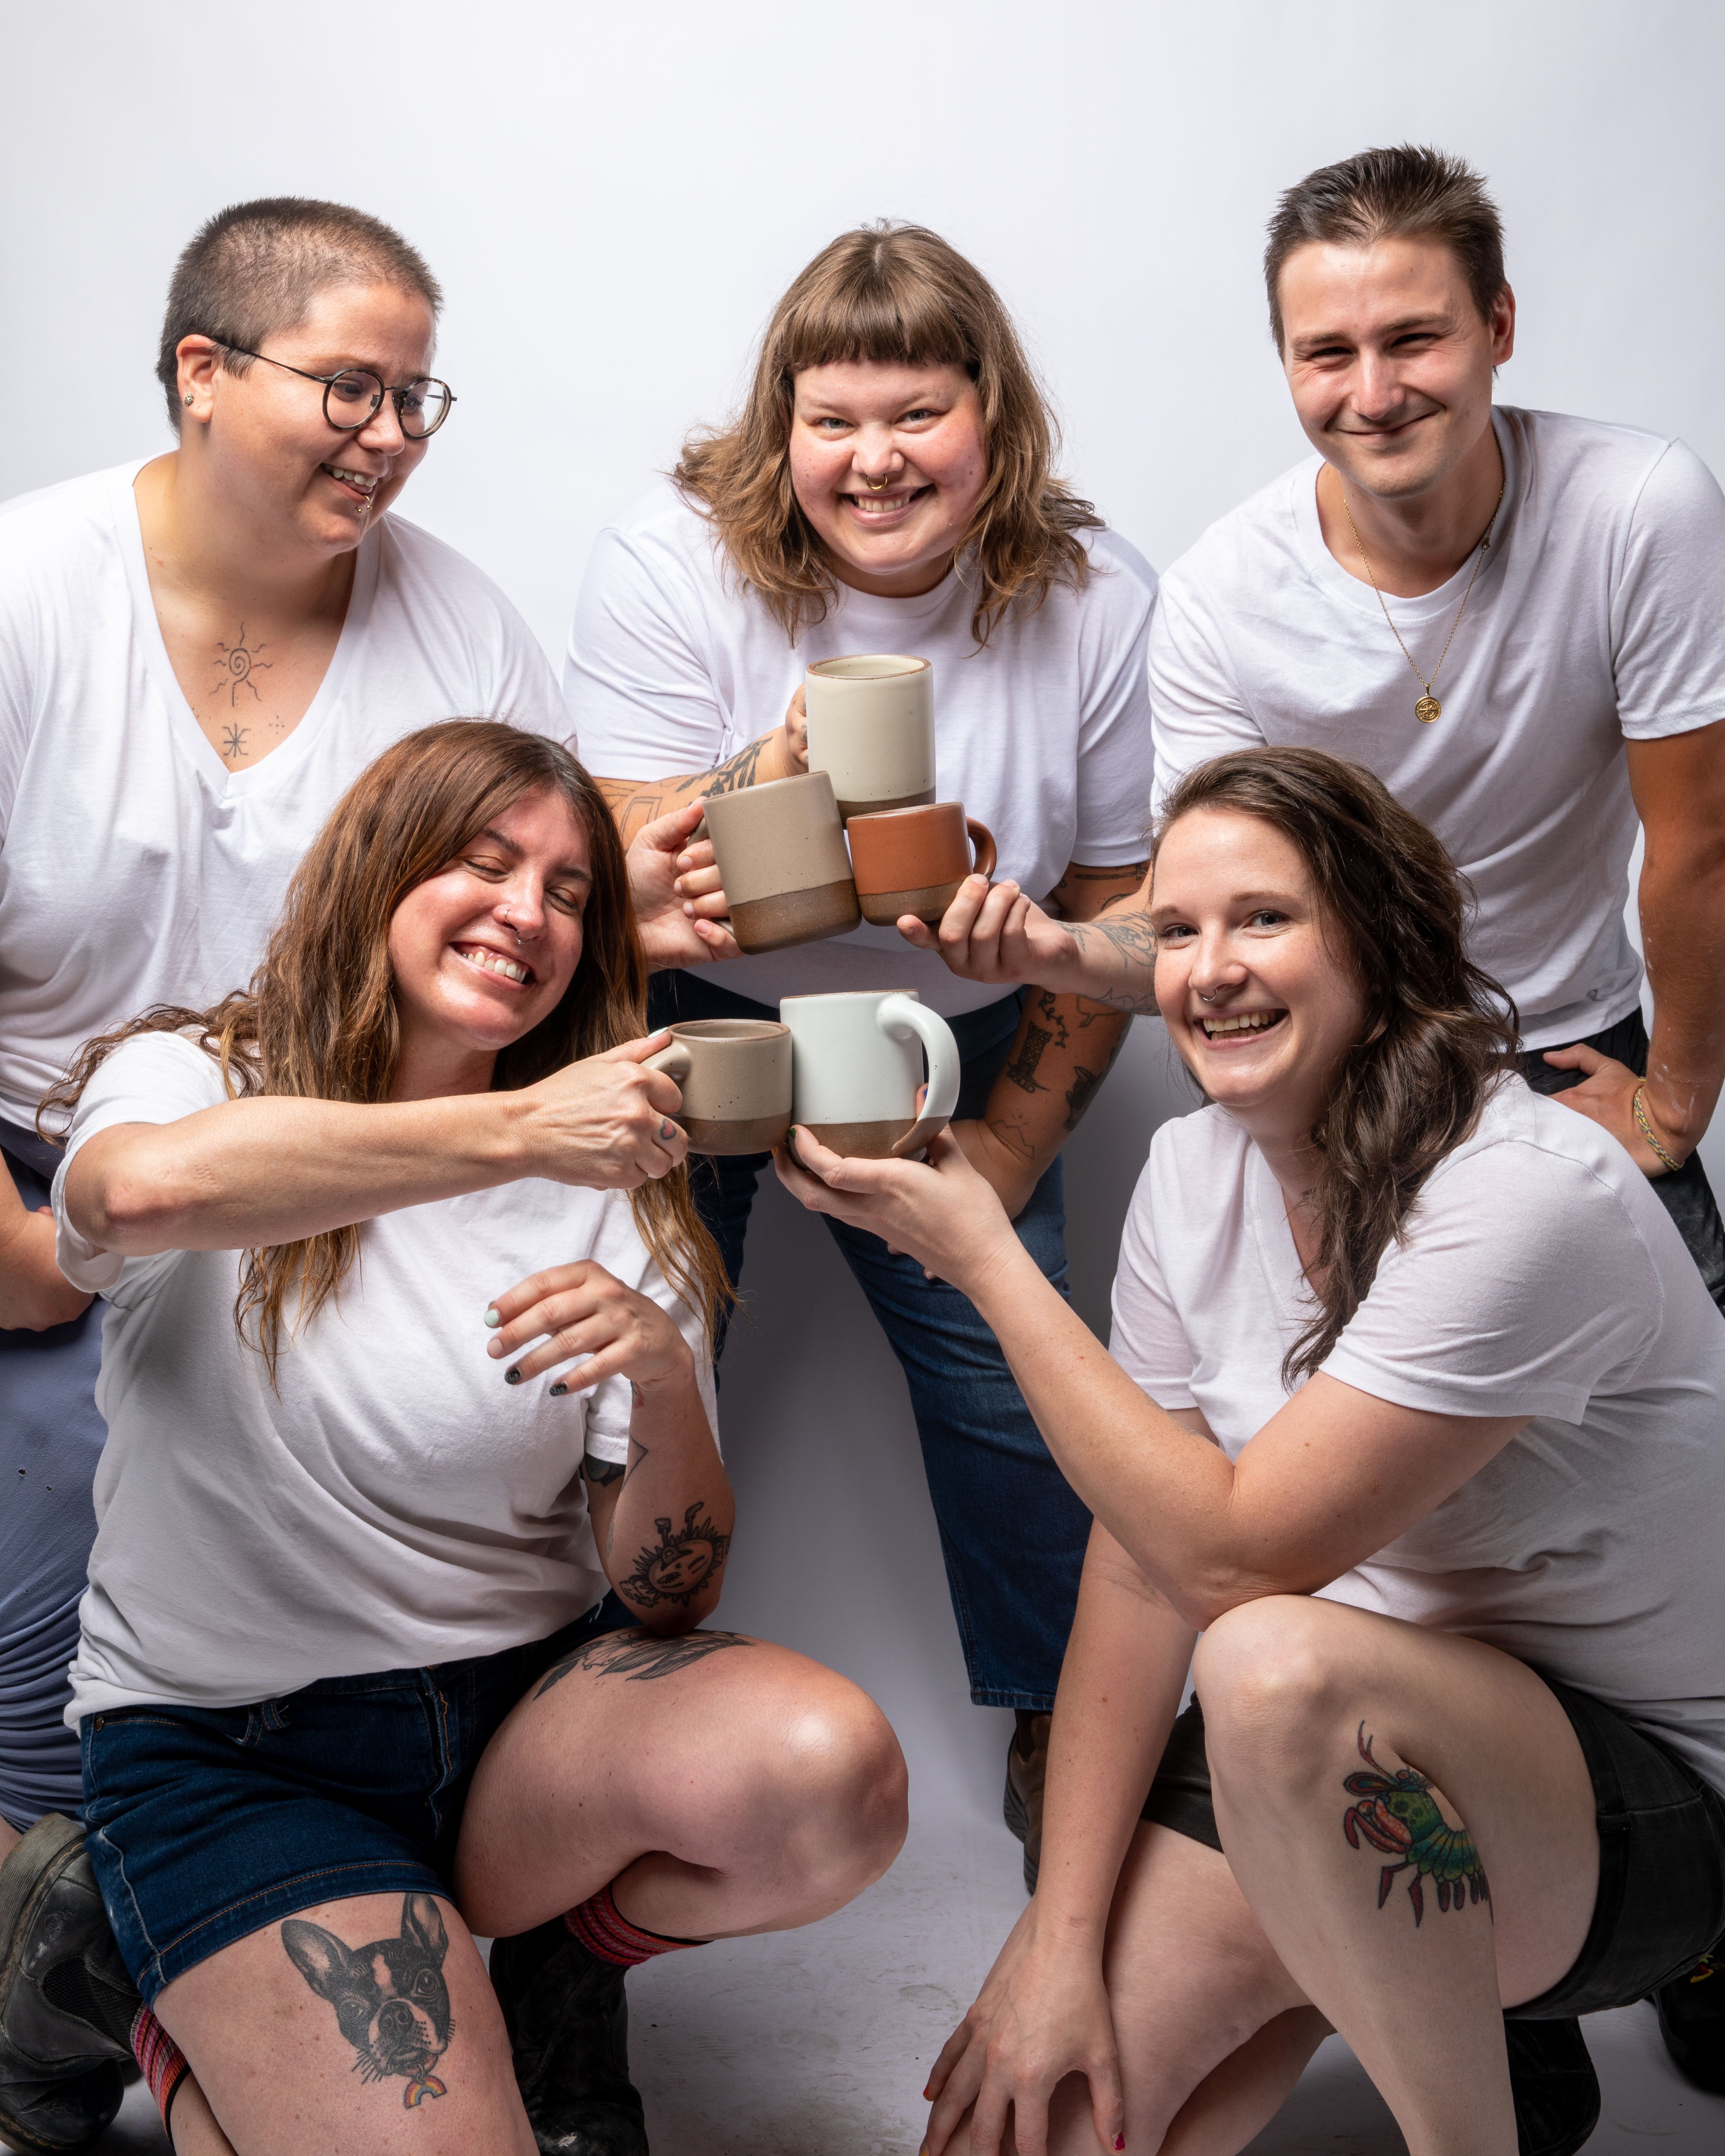 East Fork employees merrily gather on in a photography studio to show off new mugs: The Big Mug and The Small Mug.